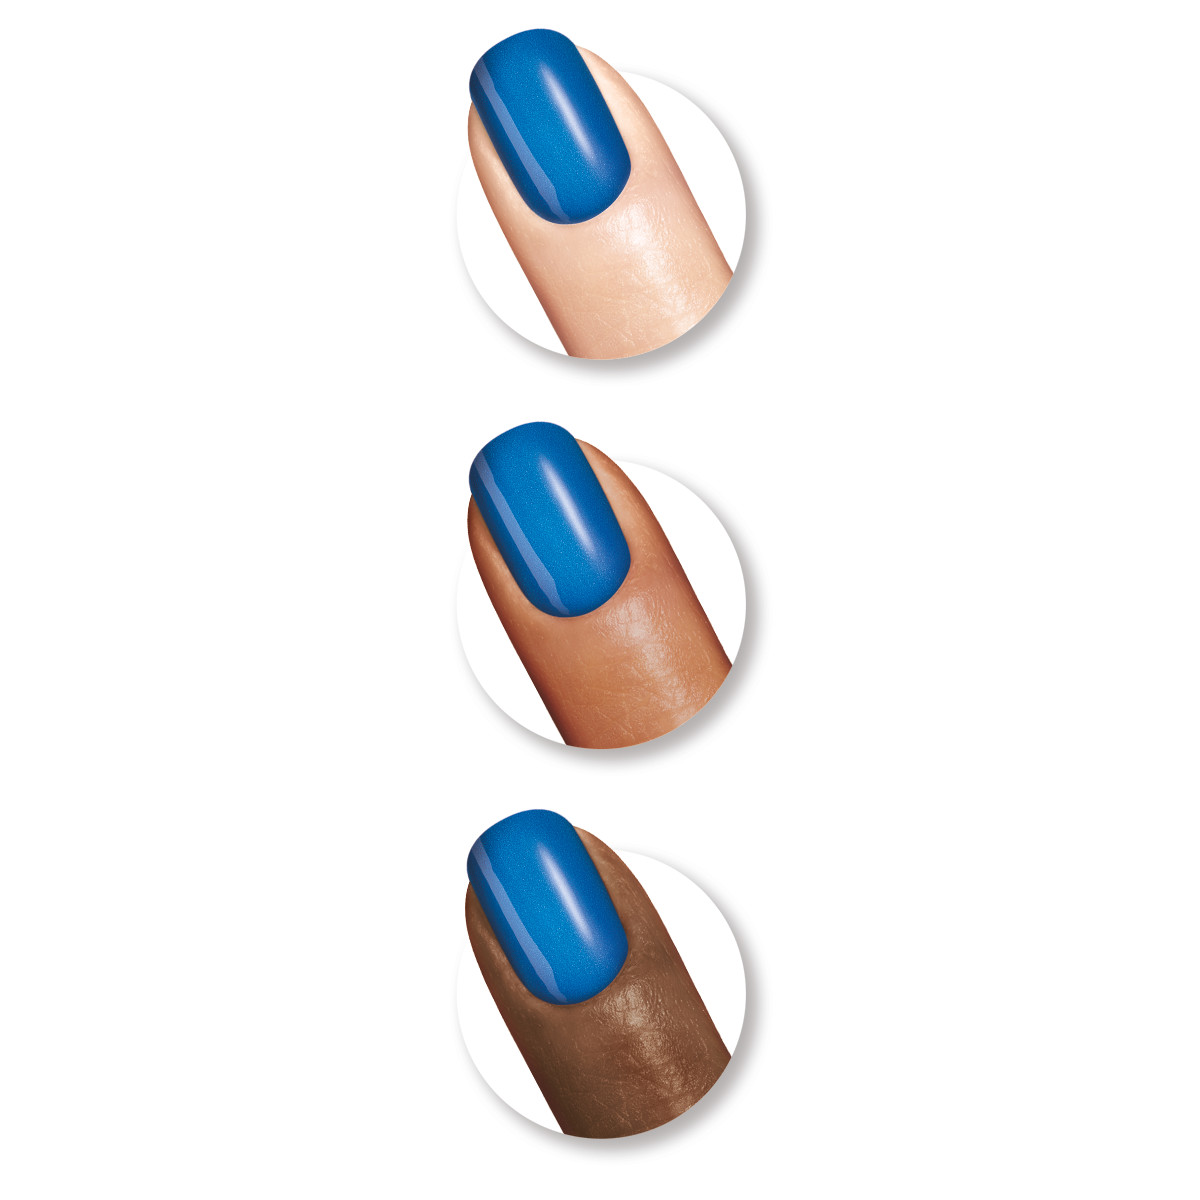 Sally Hansen Complete Salon Manicure Nail Color, Blue My Mind - image 3 of 3